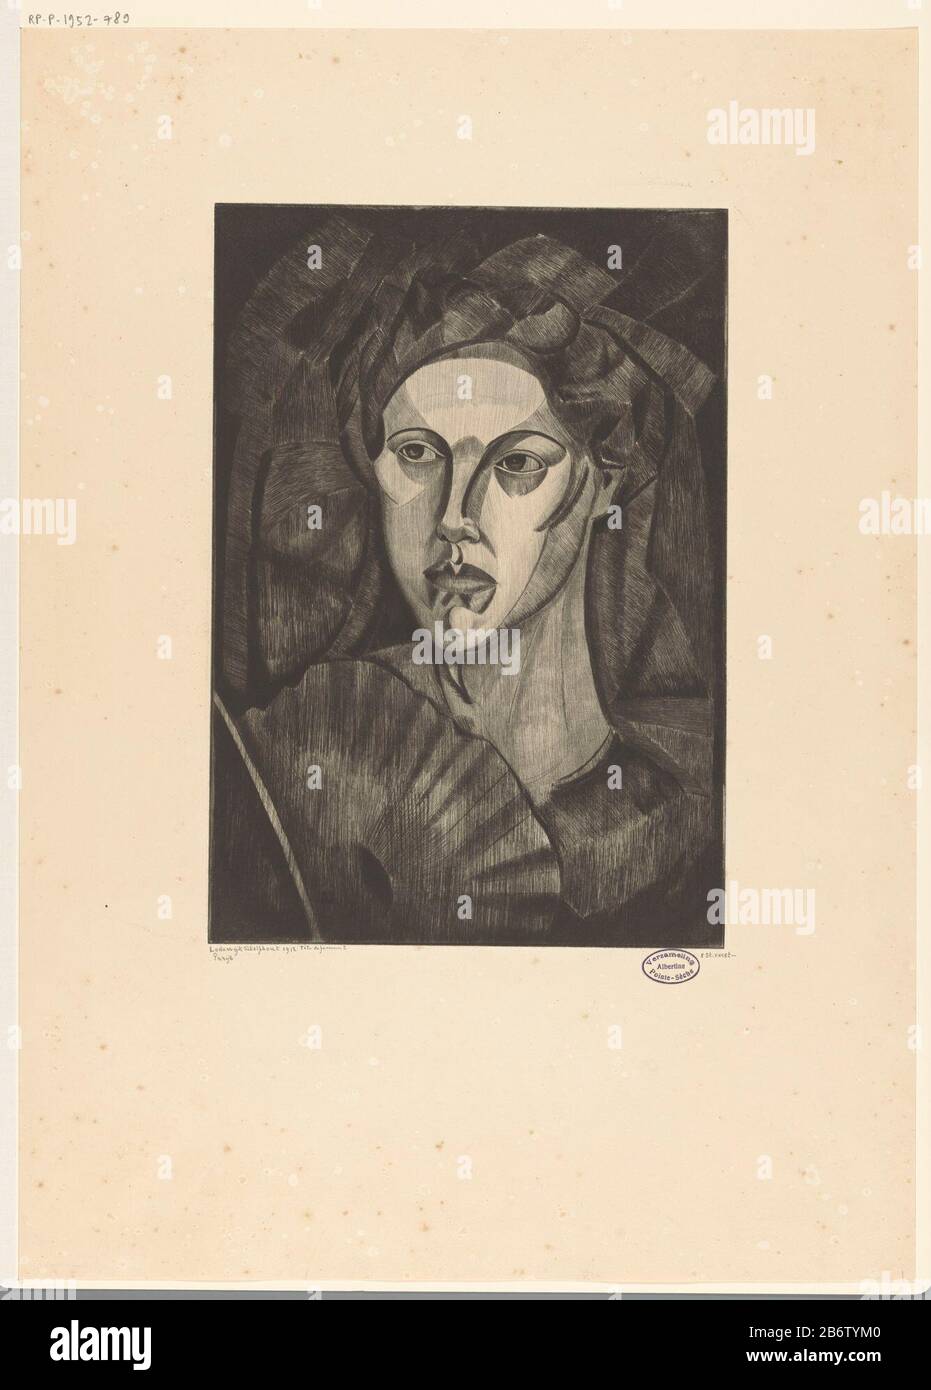 a woman with a waaier. Manufacturer : printmaker Lodewijk Schelfhout (personally signed) printer: DelâtrePlaats manufacture: Paris Date: 1912 Physical features: drypoint on galvanized zinc material: paper technique: drypoint dimensions: plate edge: h 333 mm × W 232 mm Subject: head (human) - AA - female human rights and figurefan Stock Photo